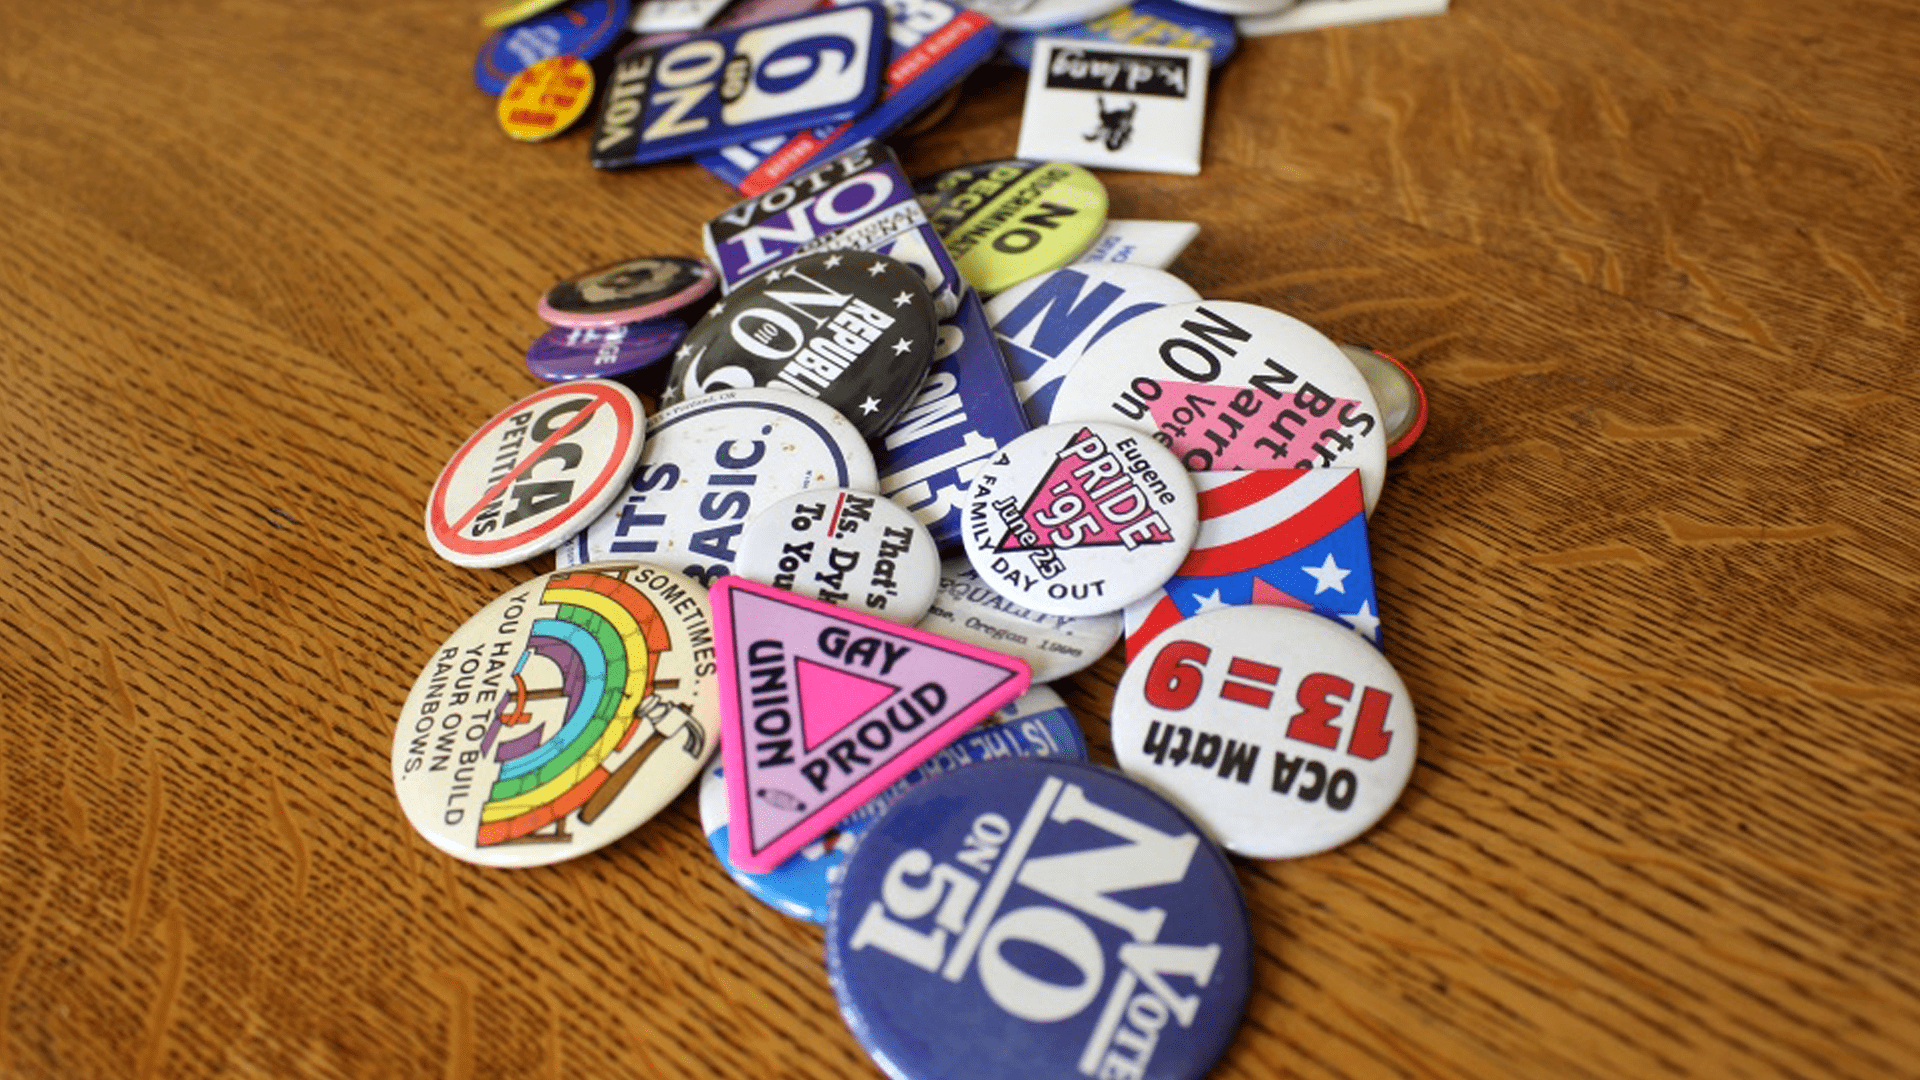 A collection of political buttons opposing local anti-LGBTQ initiatives.